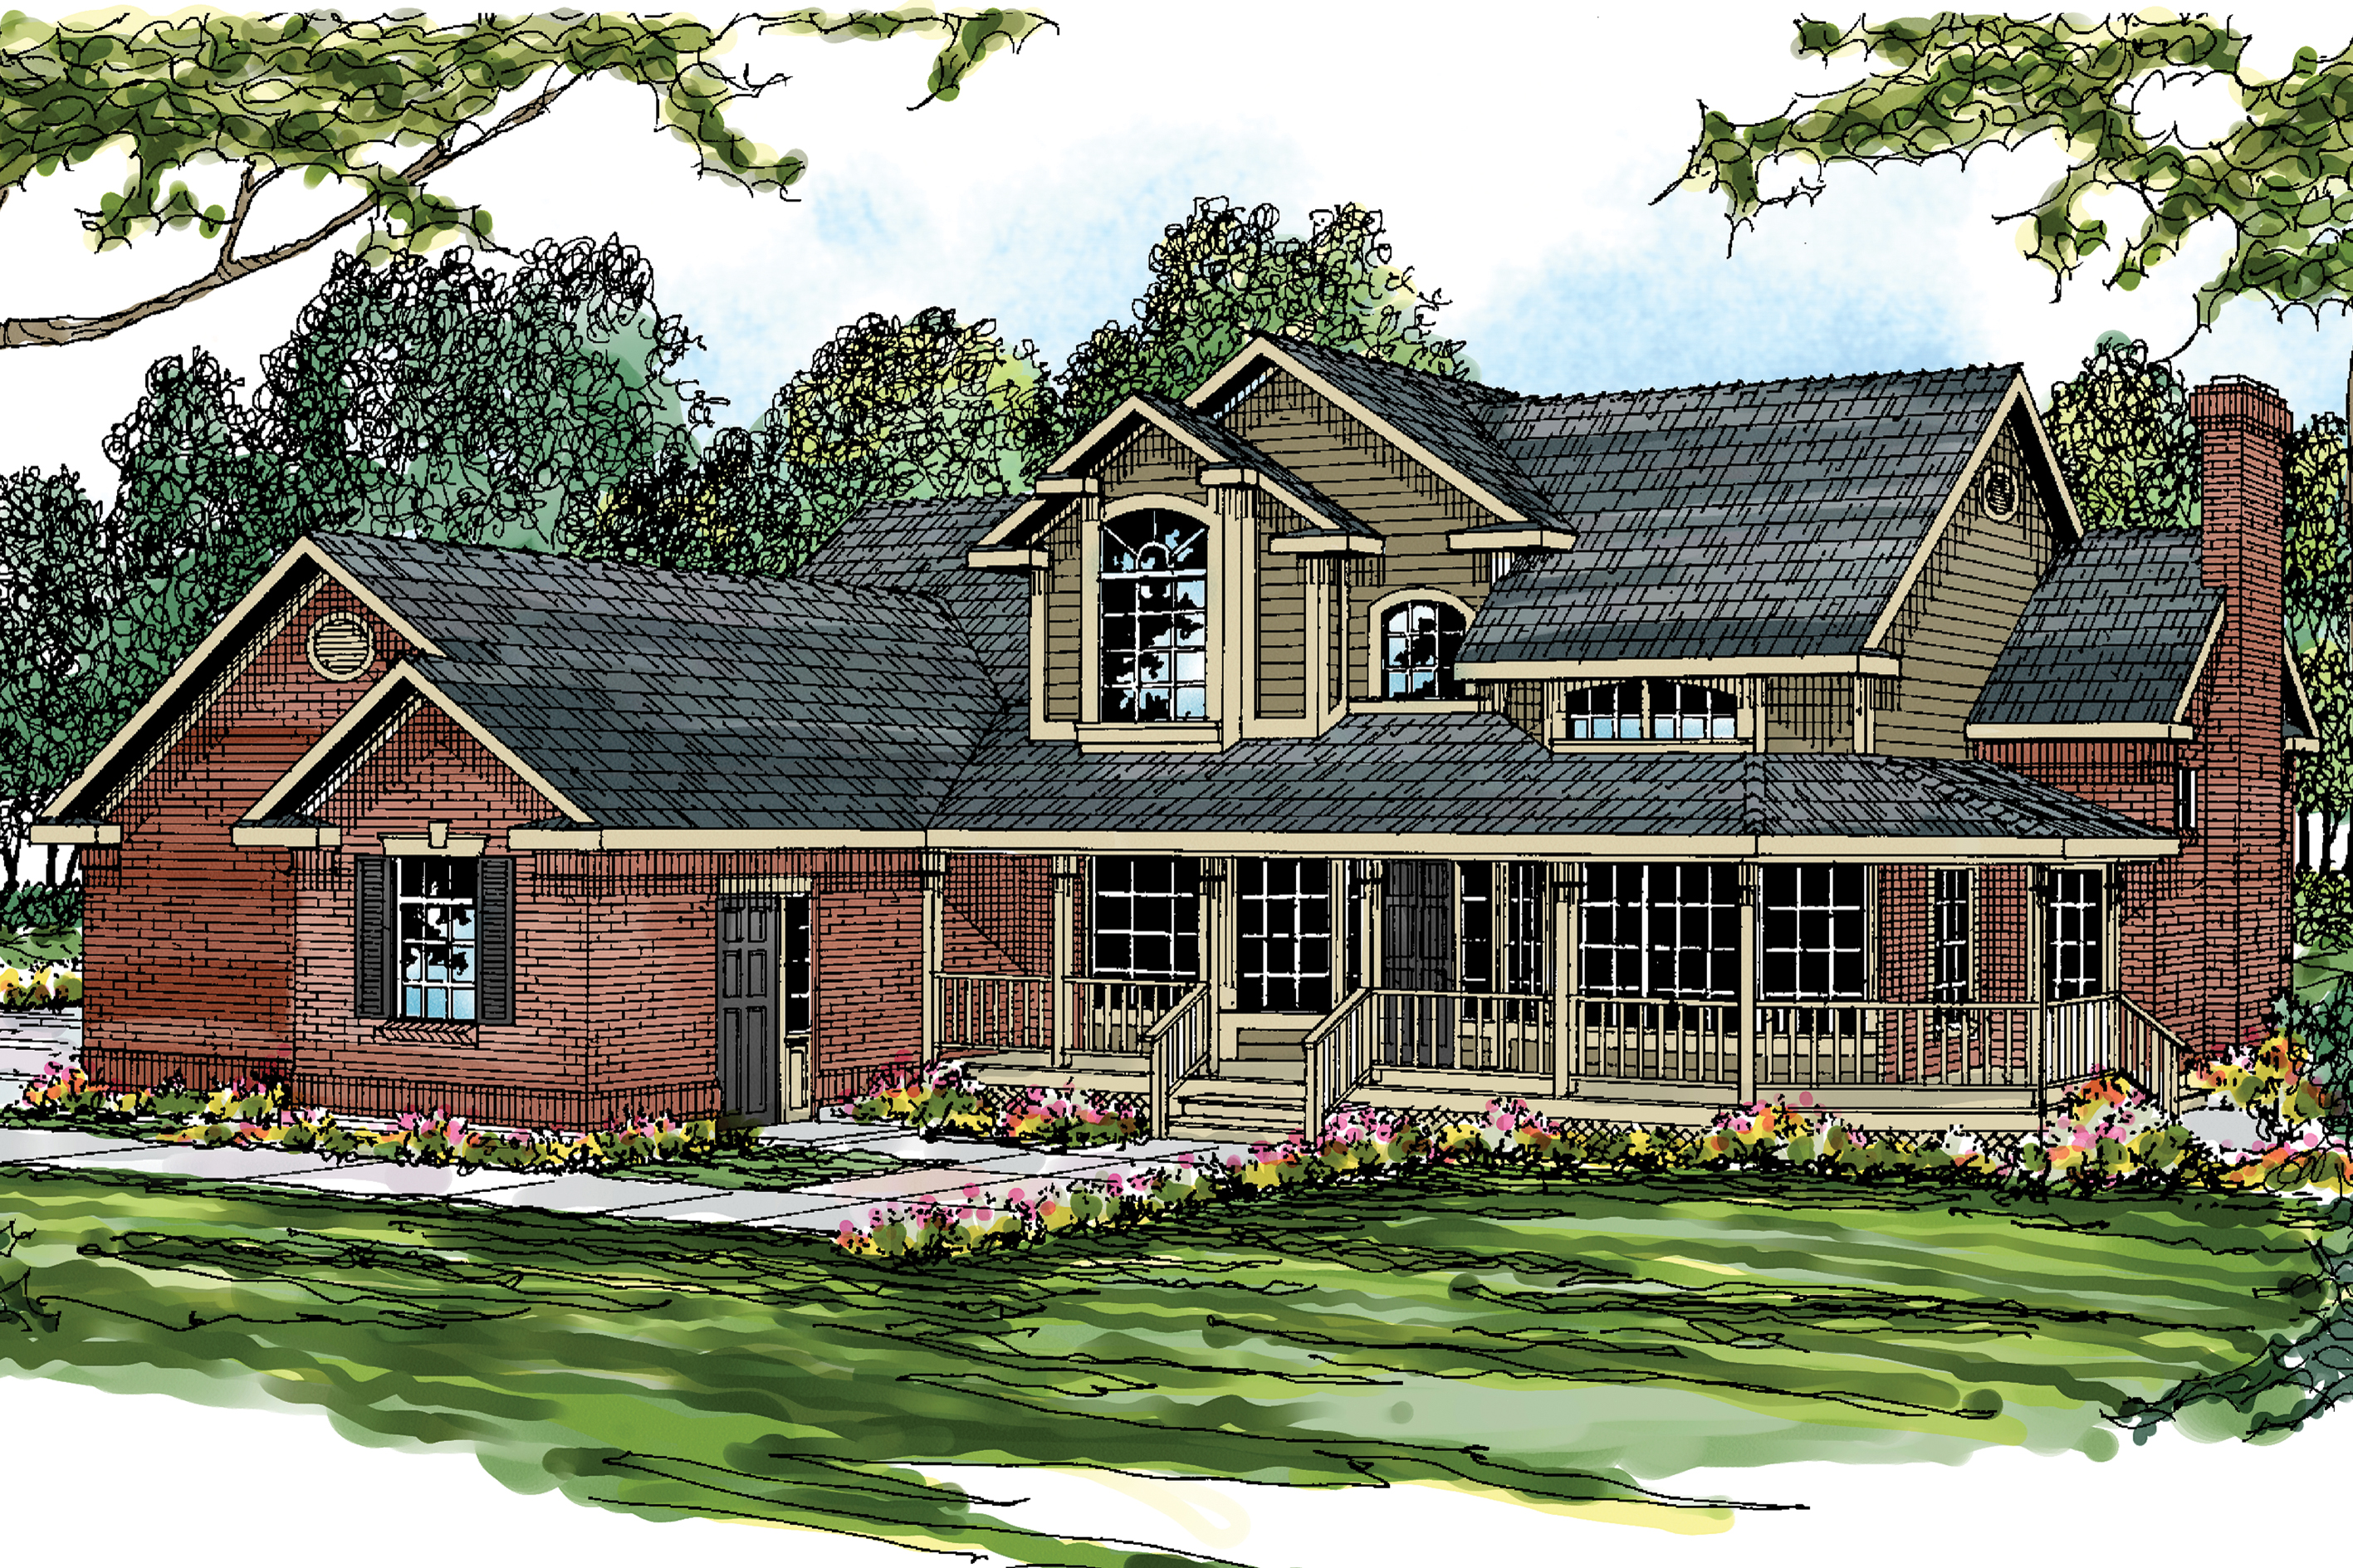 Featured House Plan of the Week, Country House Plan, Home Plan, Charleston 10-252